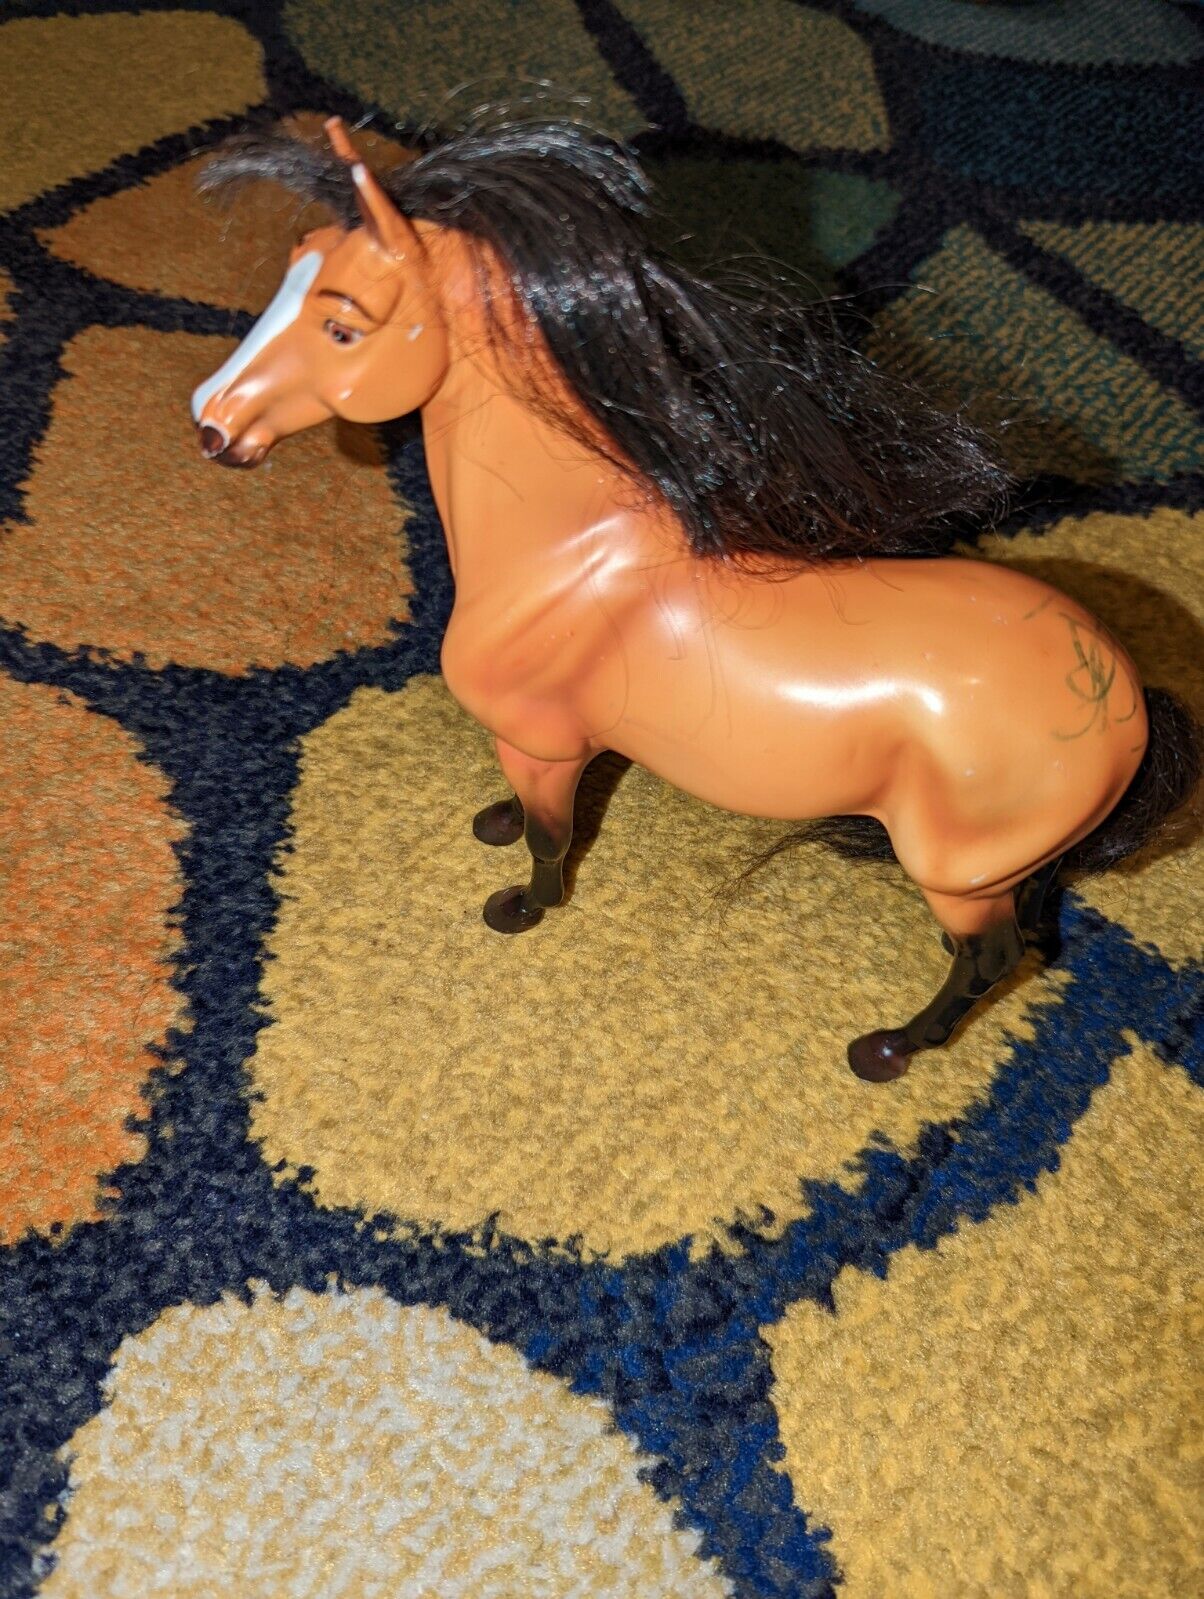 2017 Breyer Reeves DreamWorks Spirit Riding Free Horse Figure as is has issues